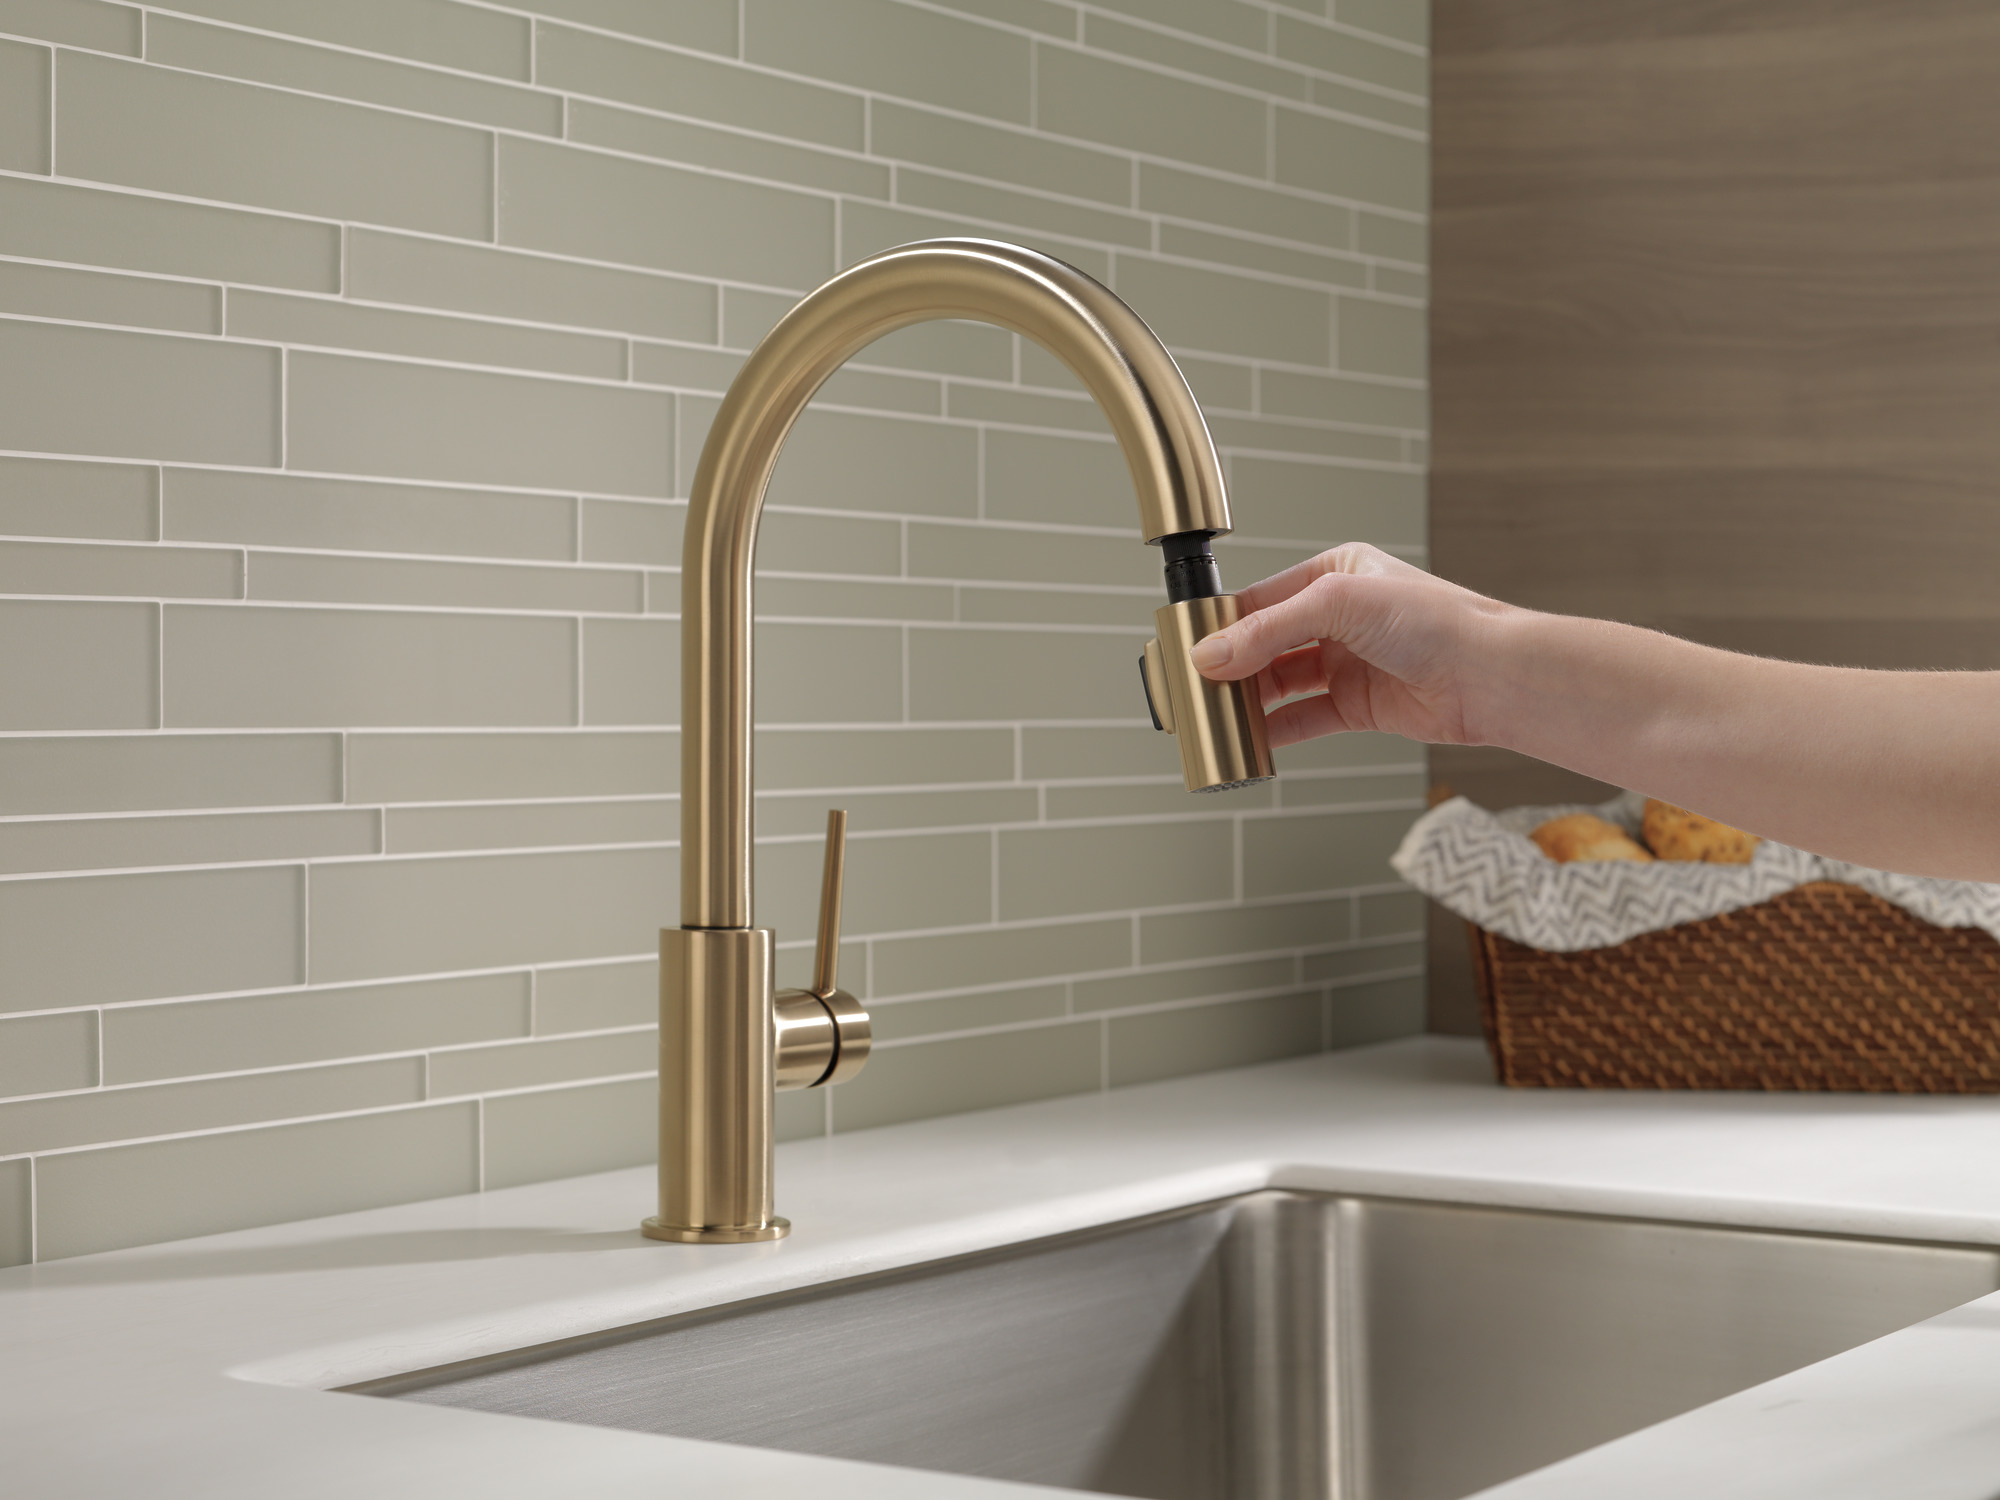 Delta Trinsic® Single Handle Pull-Down Kitchen Faucet - image 5 of 10